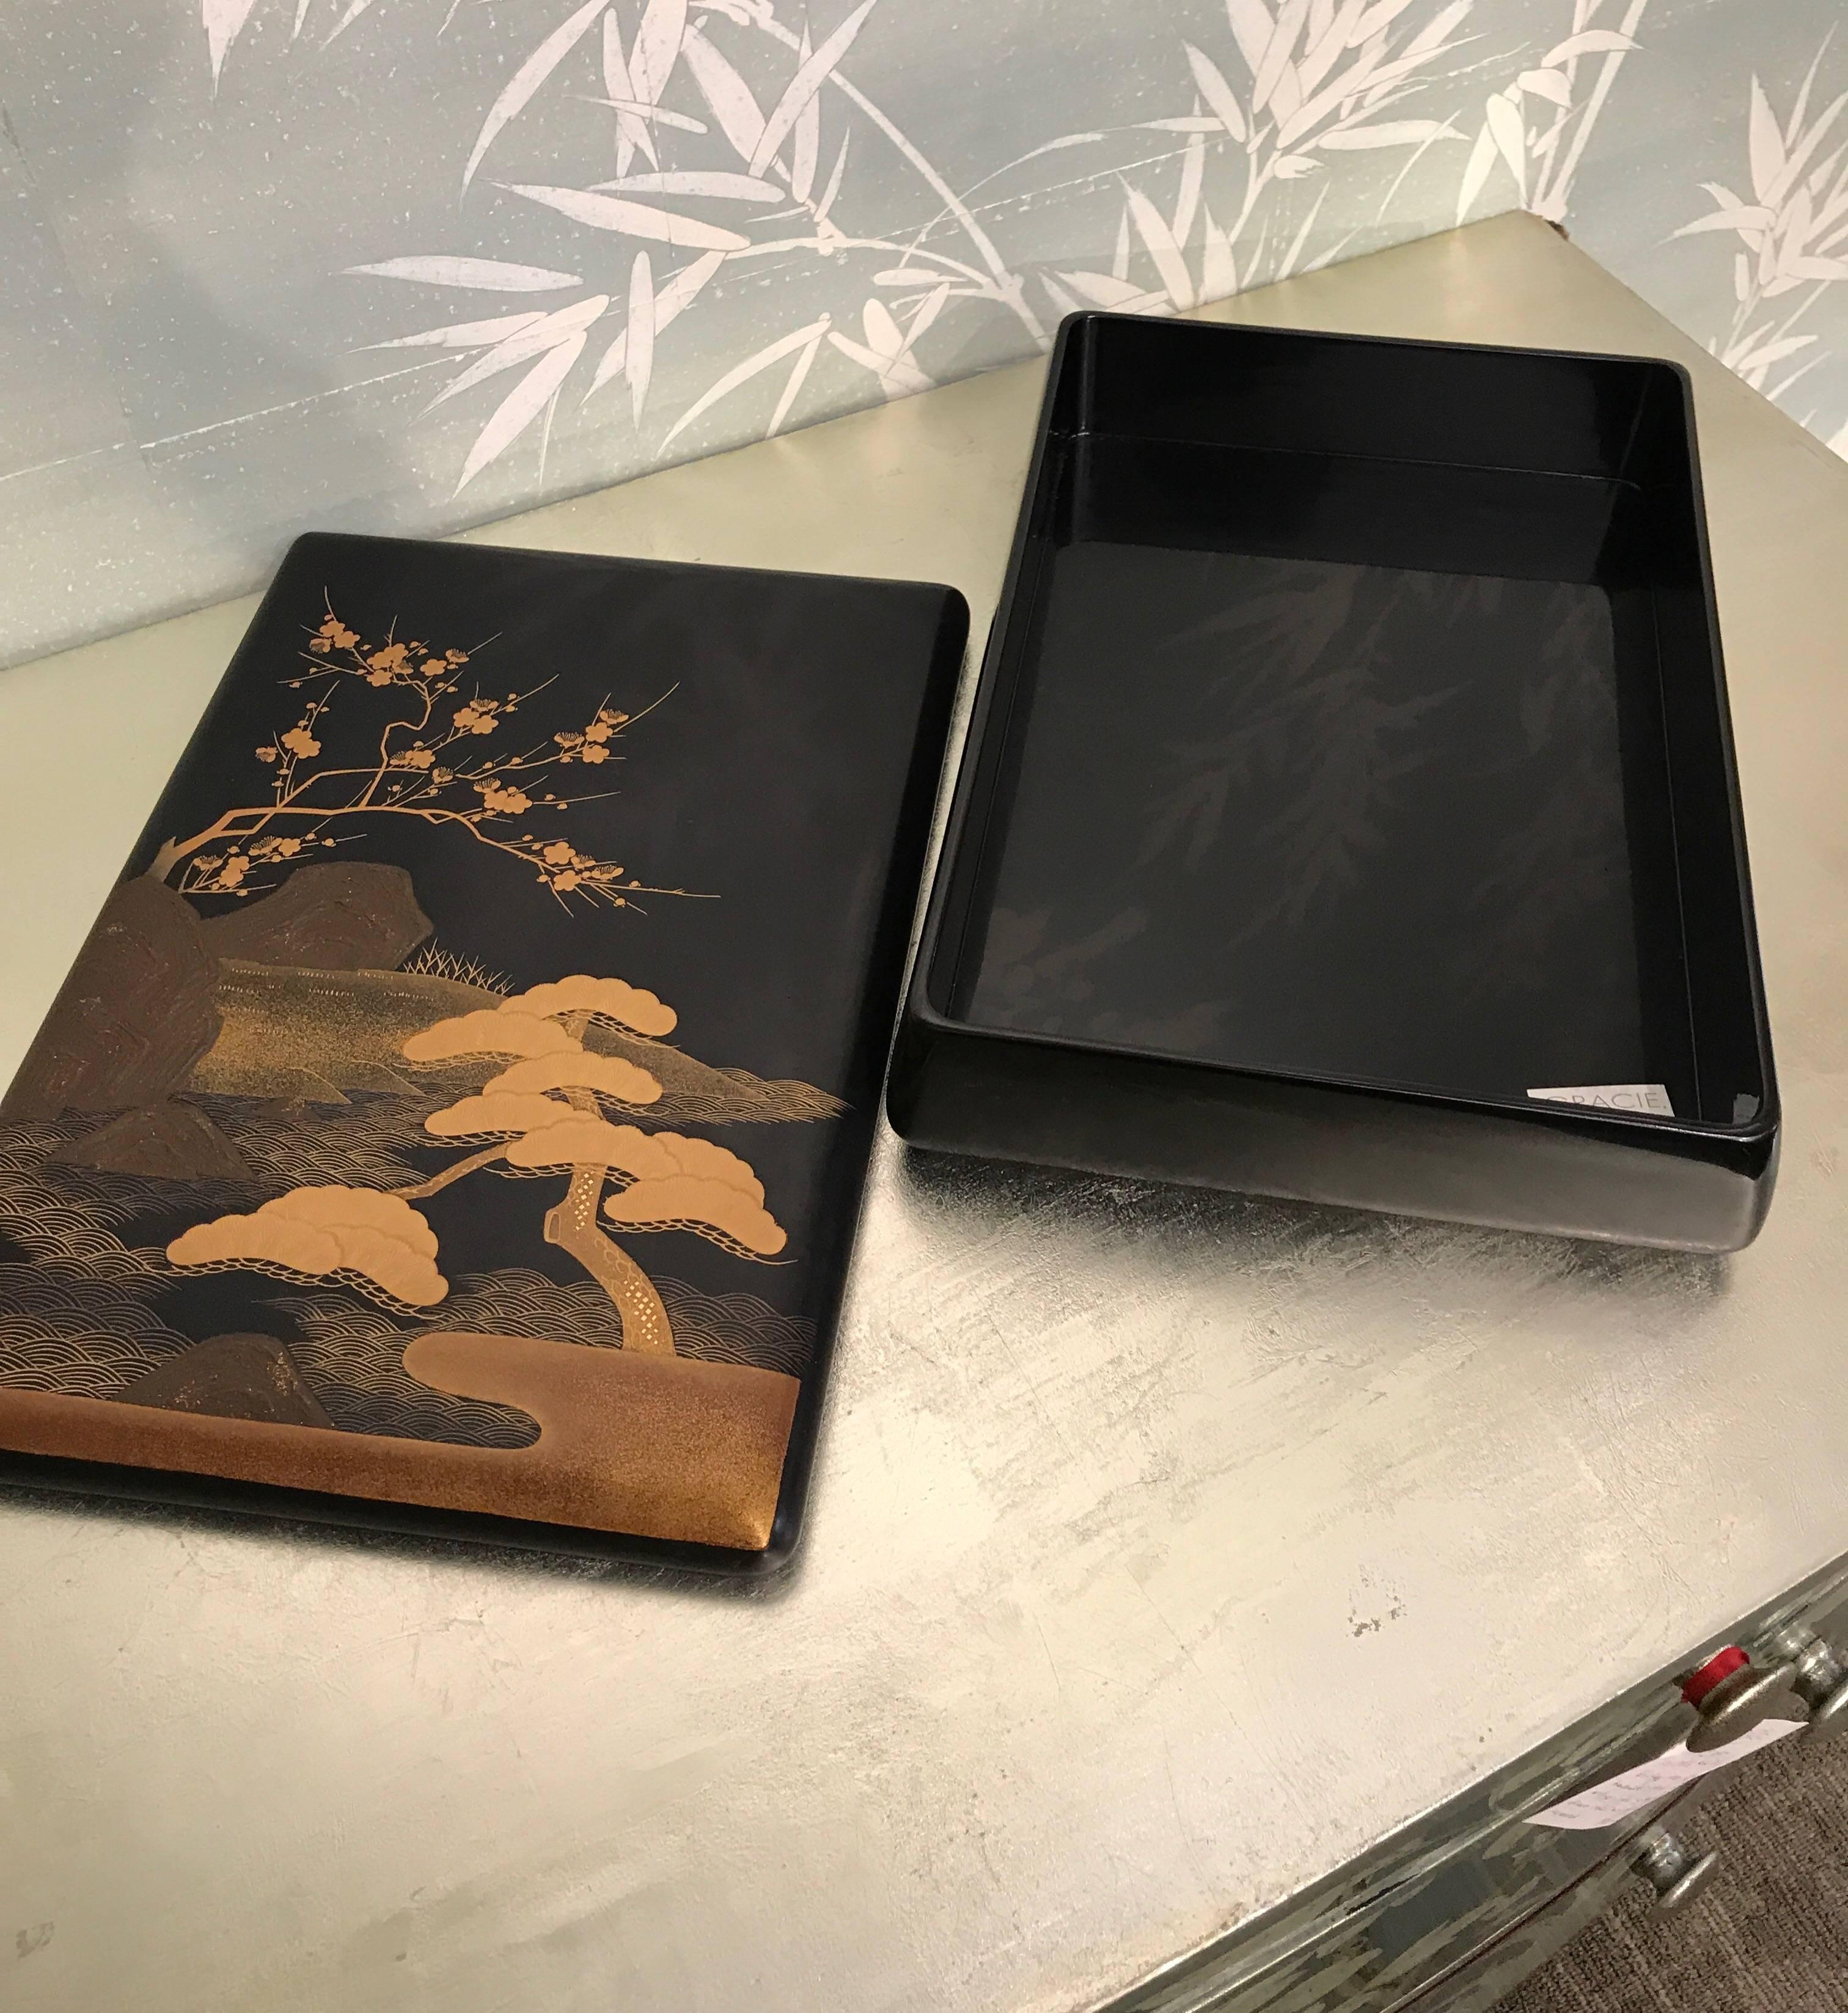 japanese lacquered box